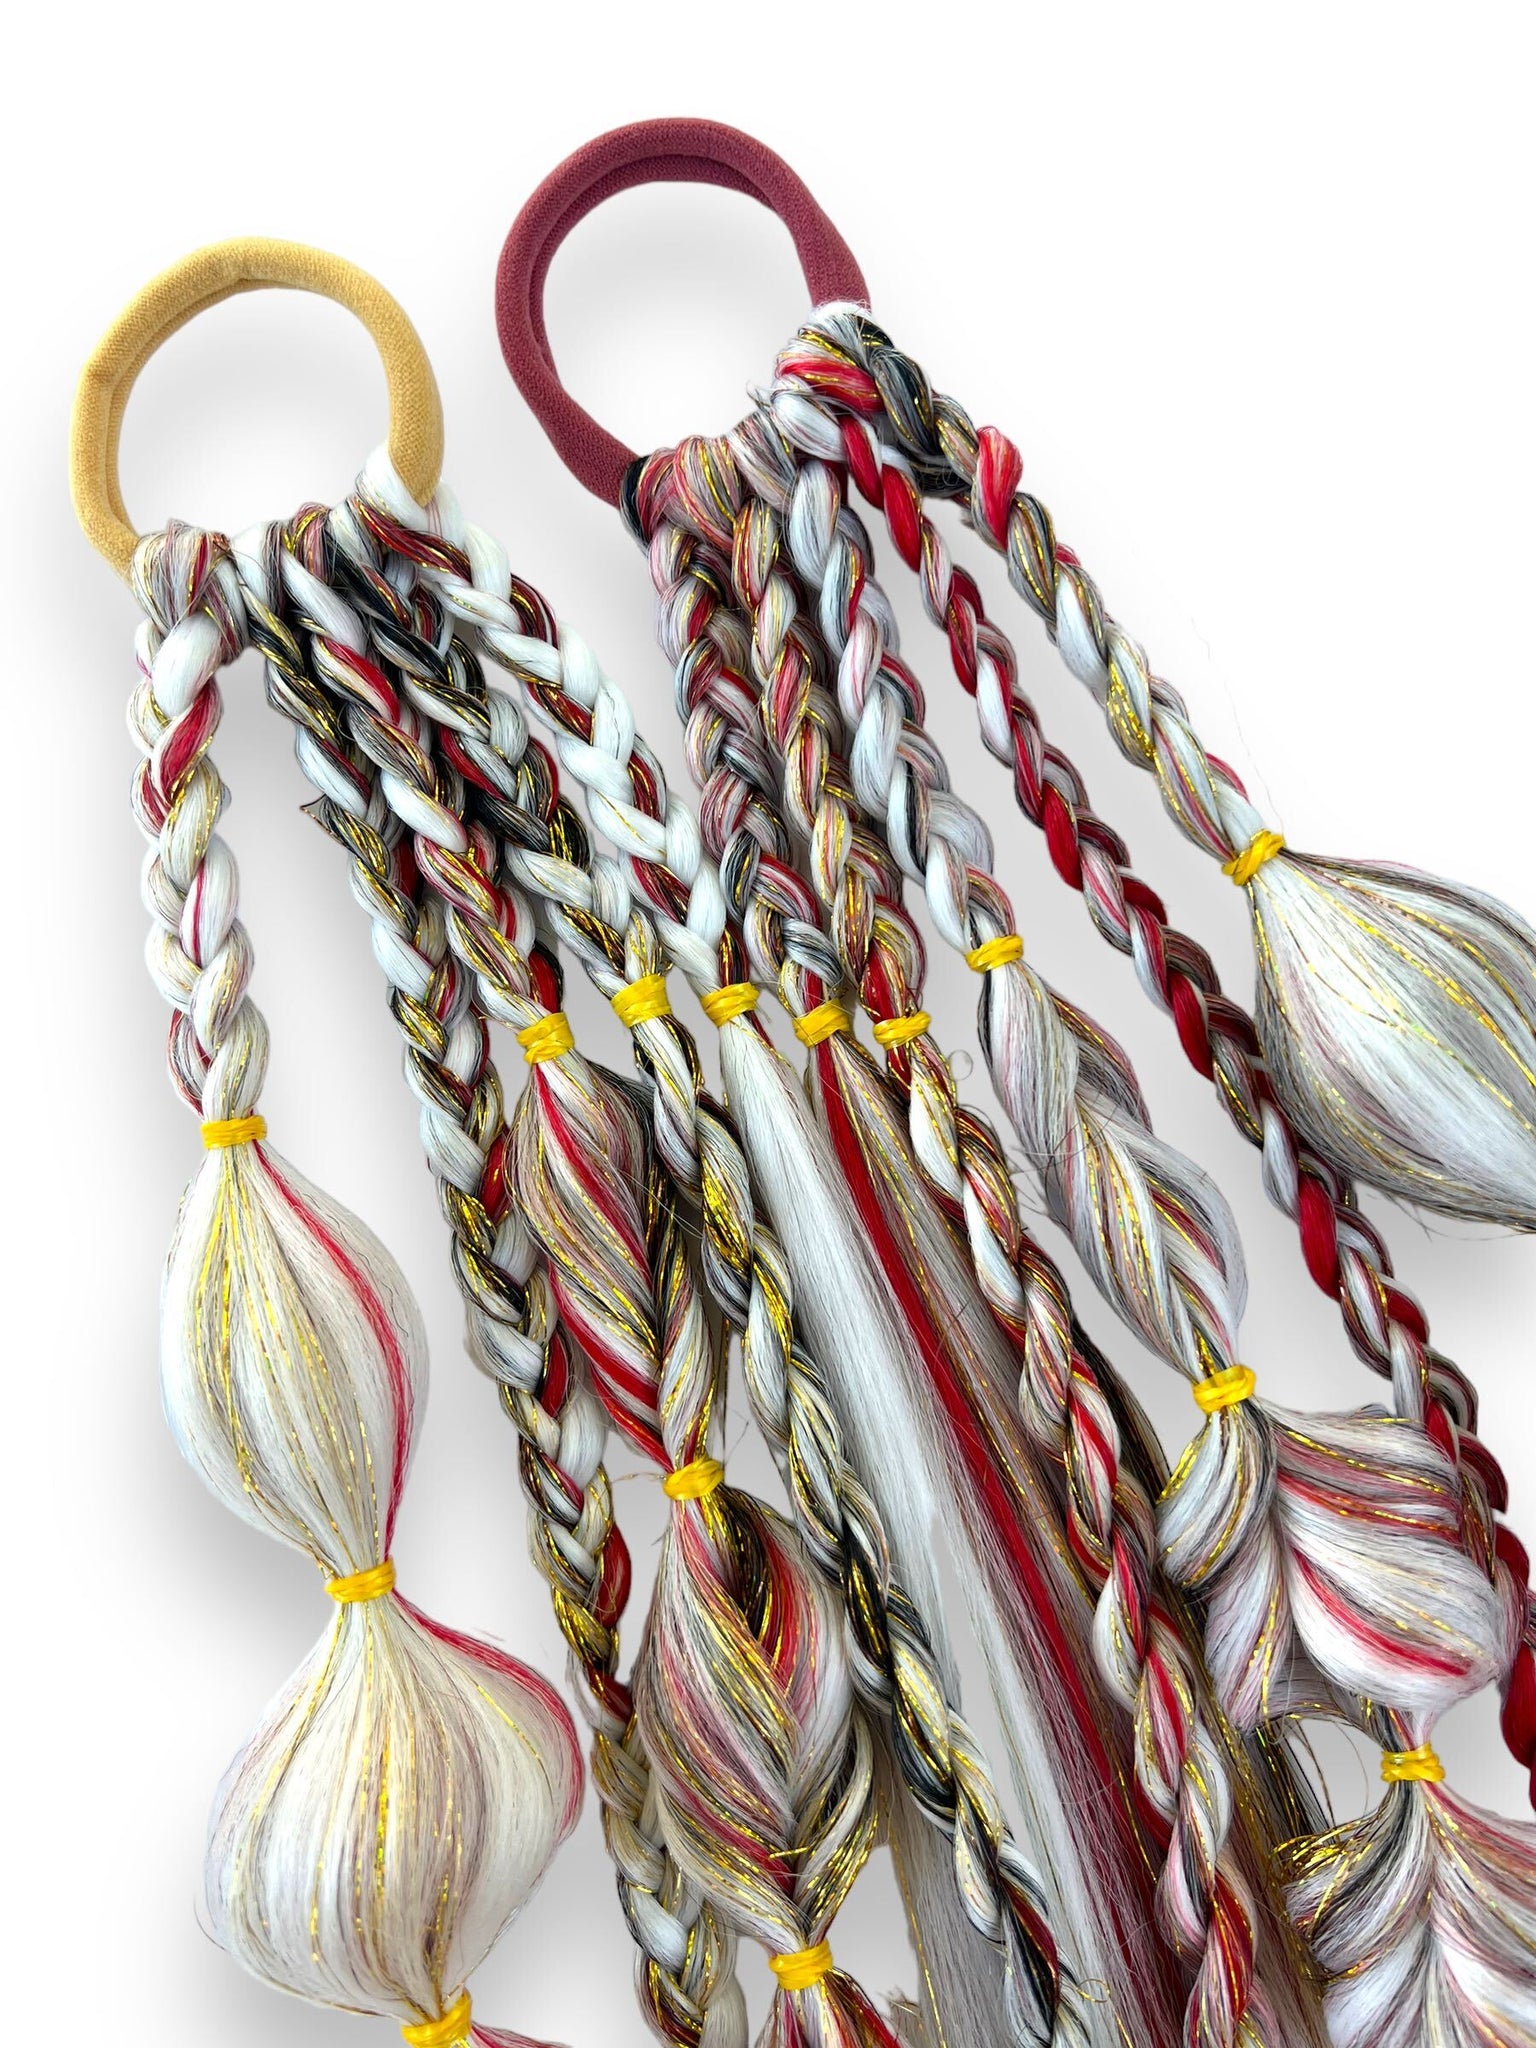 Red & Gold SPORTS - Tie-In Braid Extension Set of 2